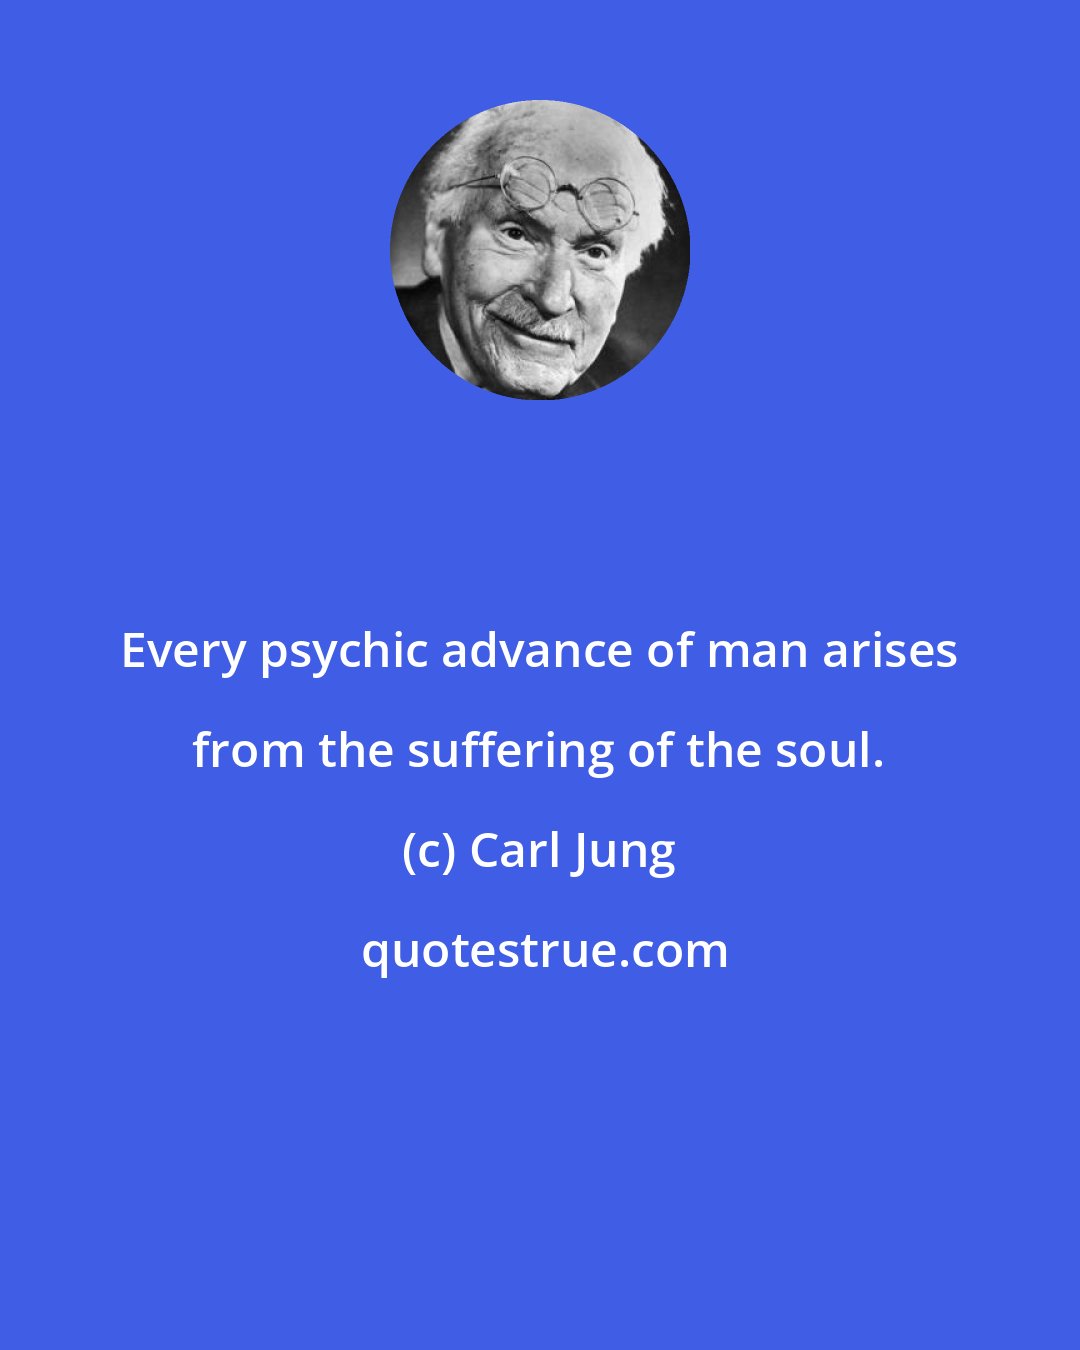 Carl Jung: Every psychic advance of man arises from the suffering of the soul.